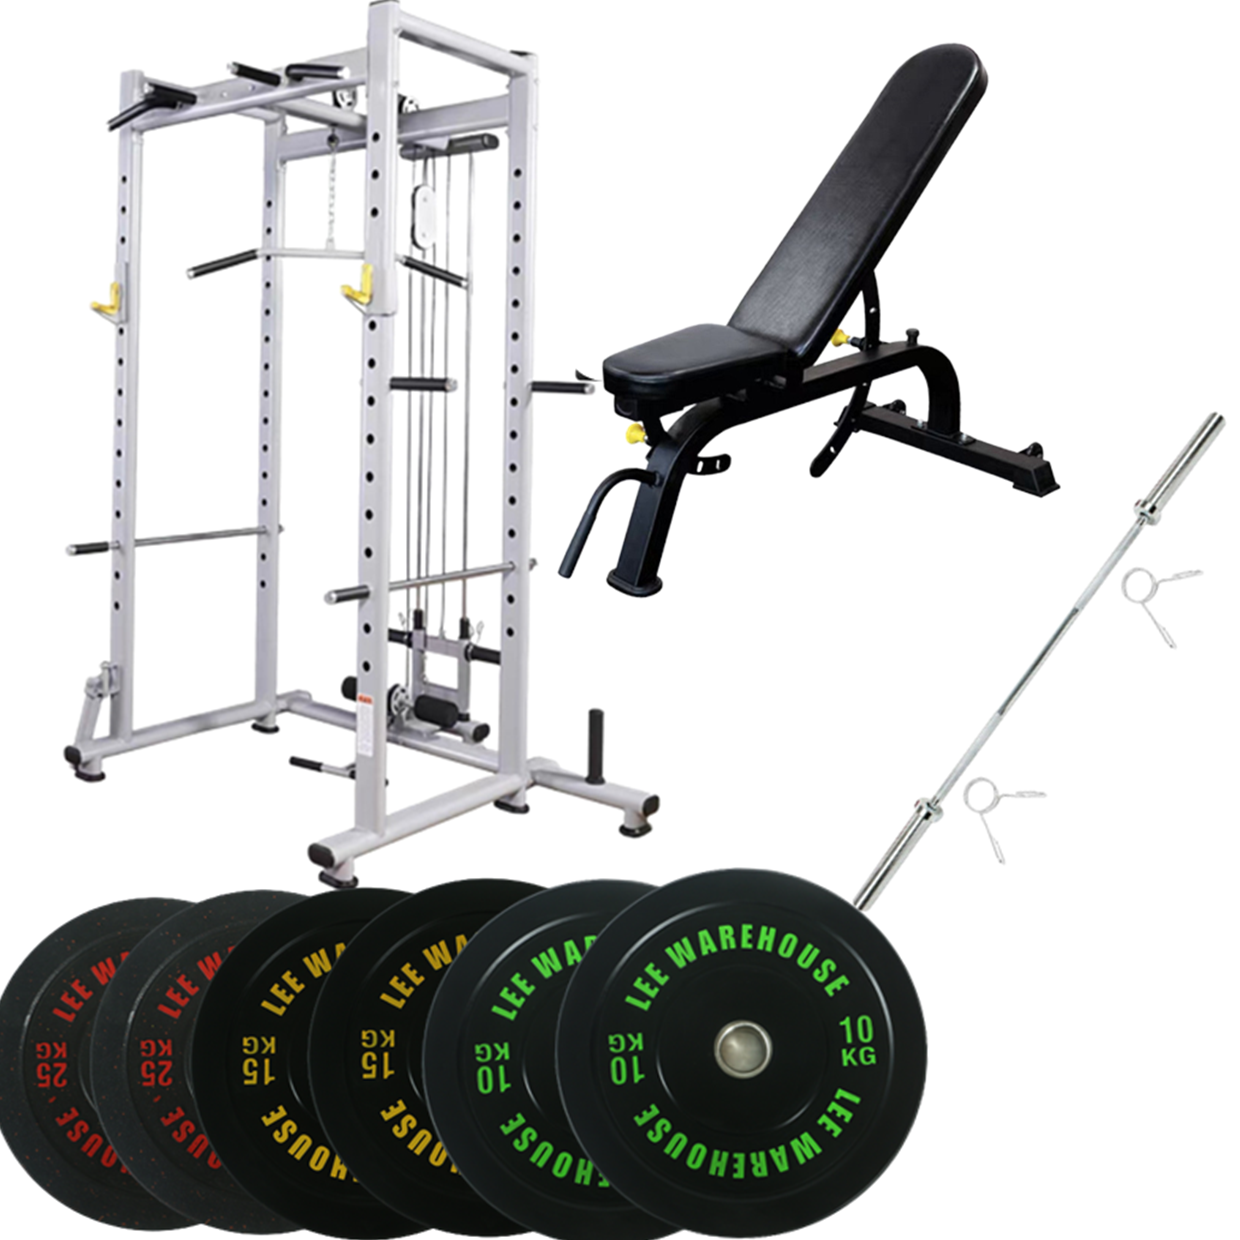 Home Gym Set |Power cage+Bench+Barbell+Weights